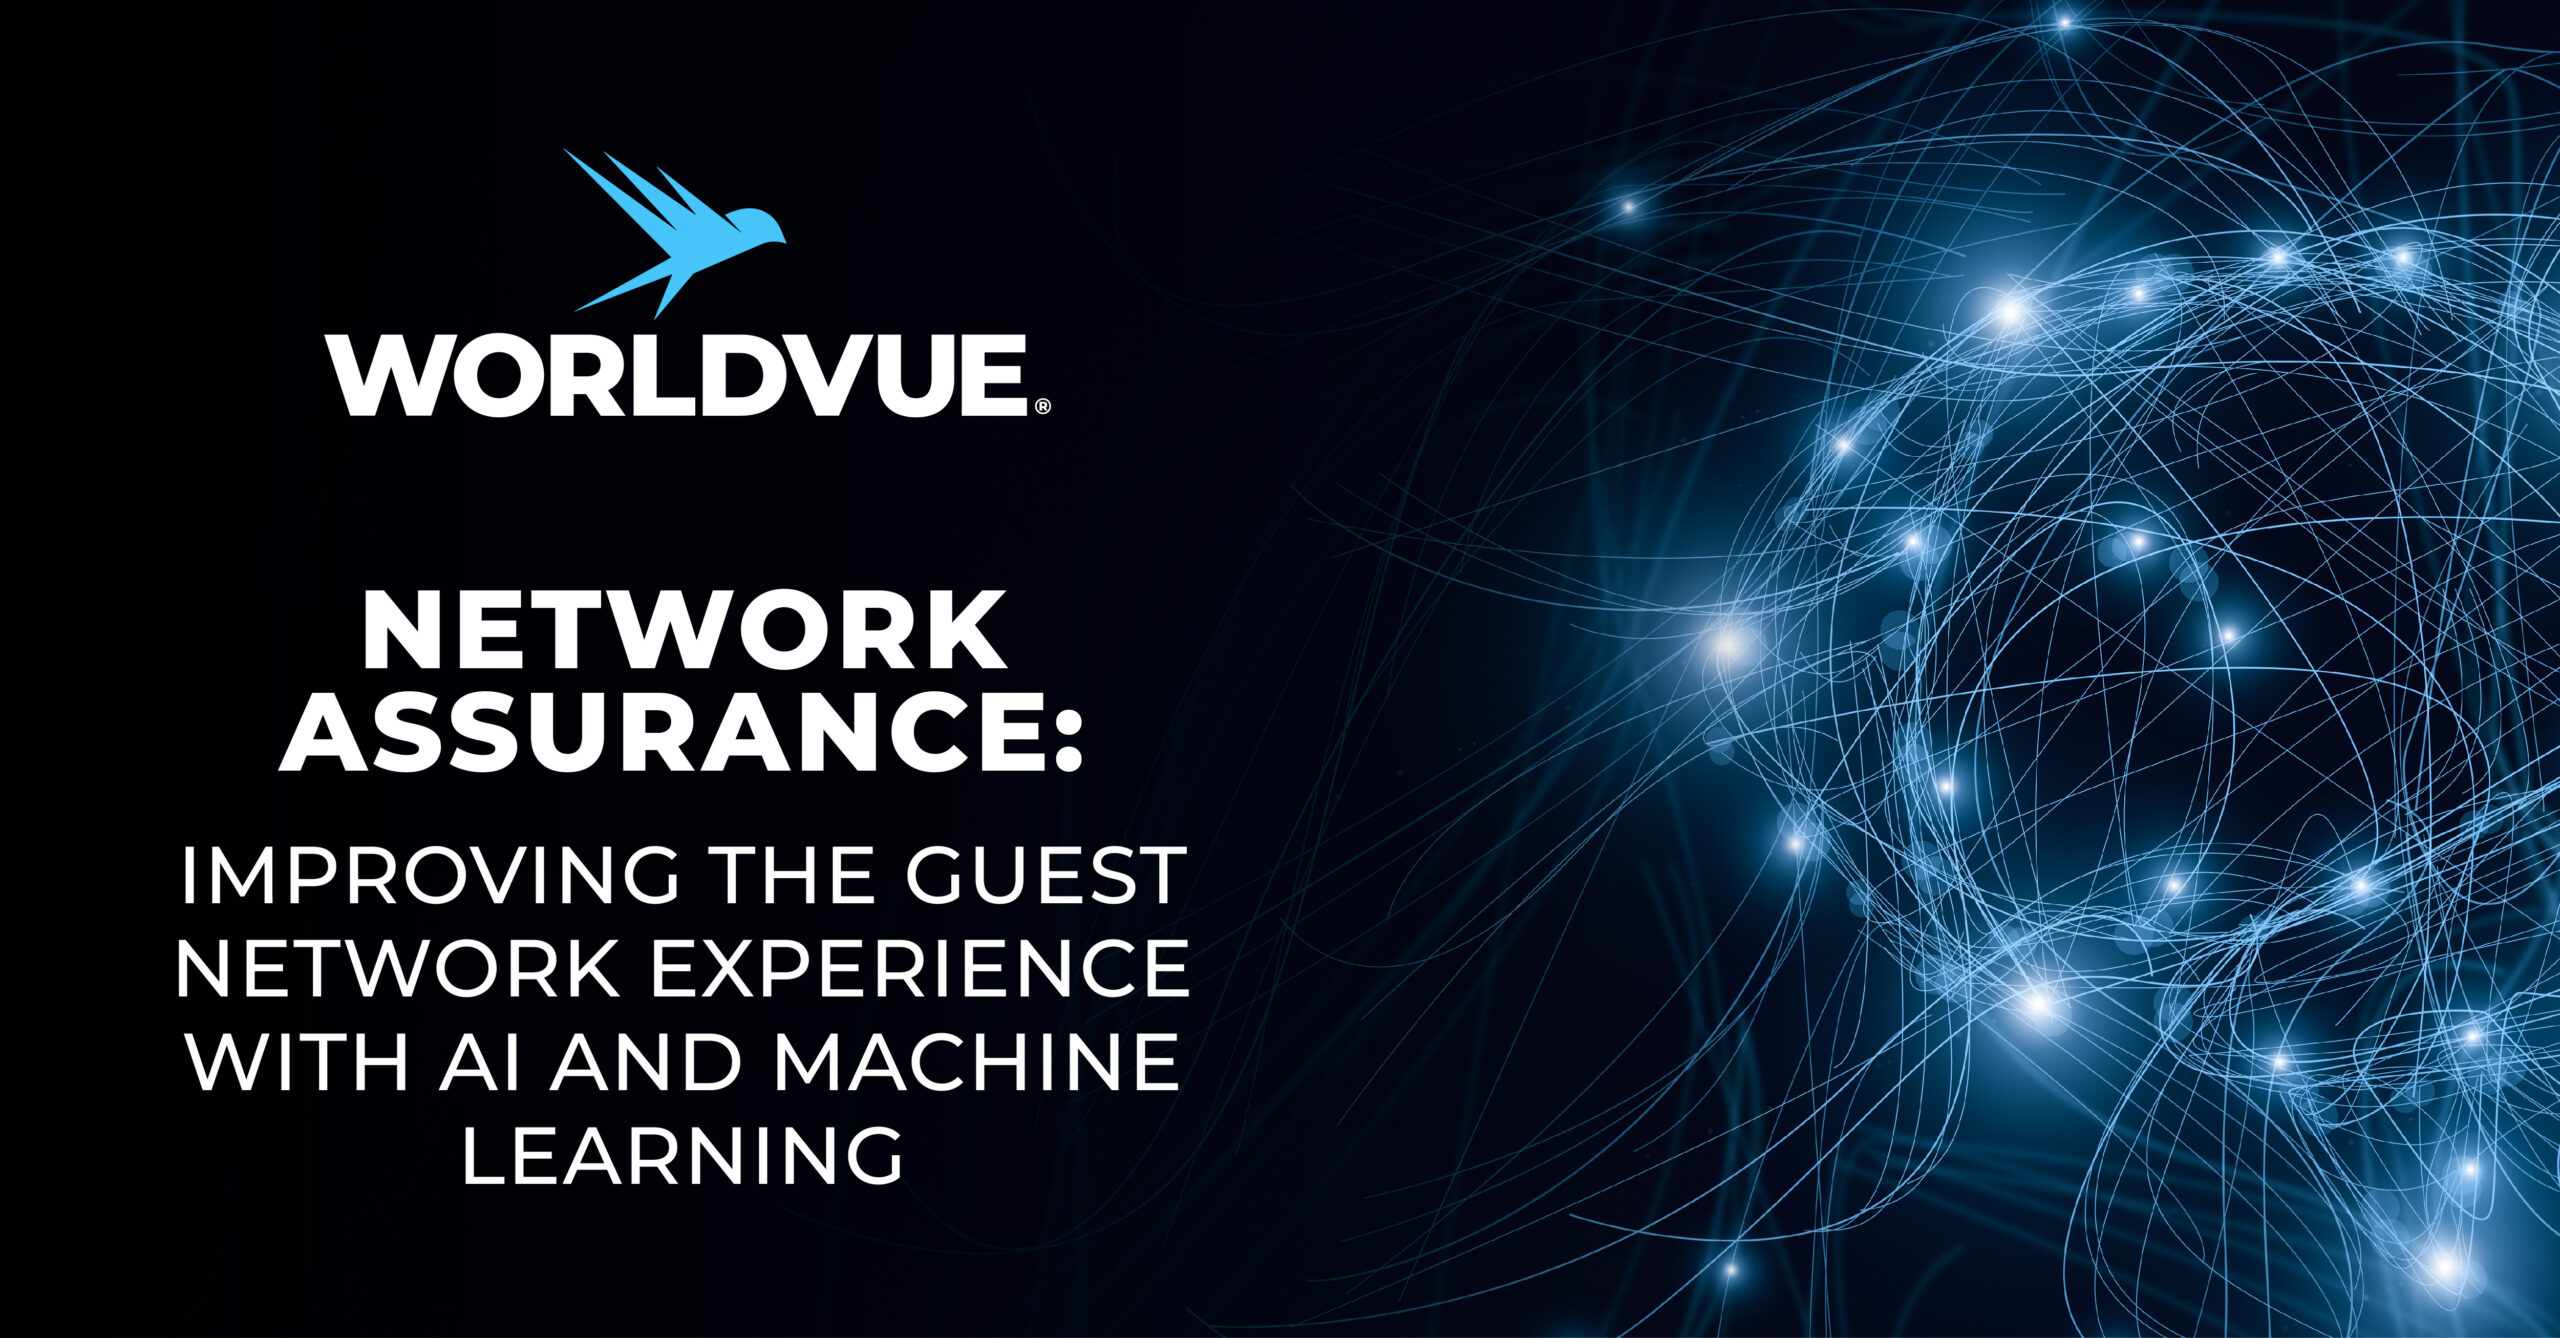 background suggesting network connections with lit-up points, with the WorldVue logo and the text "Network Assurance: Improving the Guest Network Experience with AI and Machine Learning"